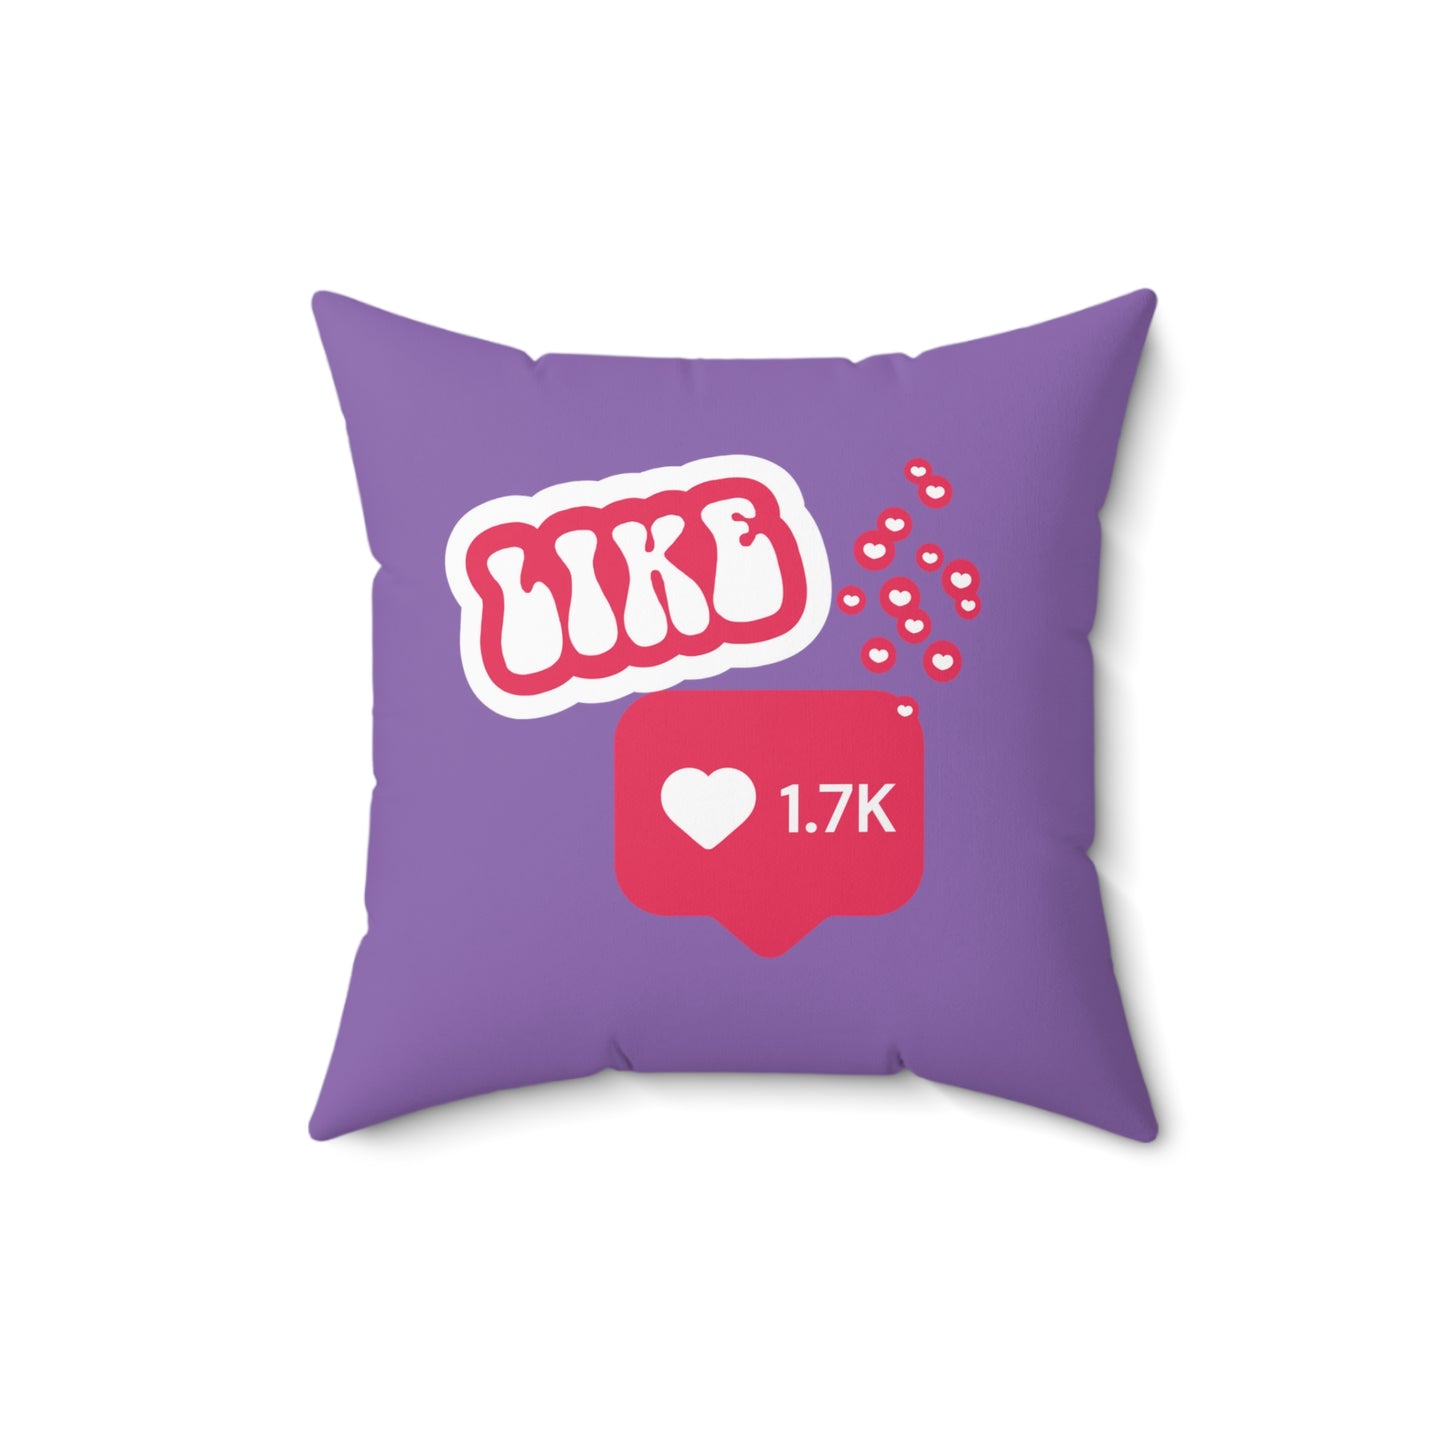 Doing It For Likes Square Pillow - Purple